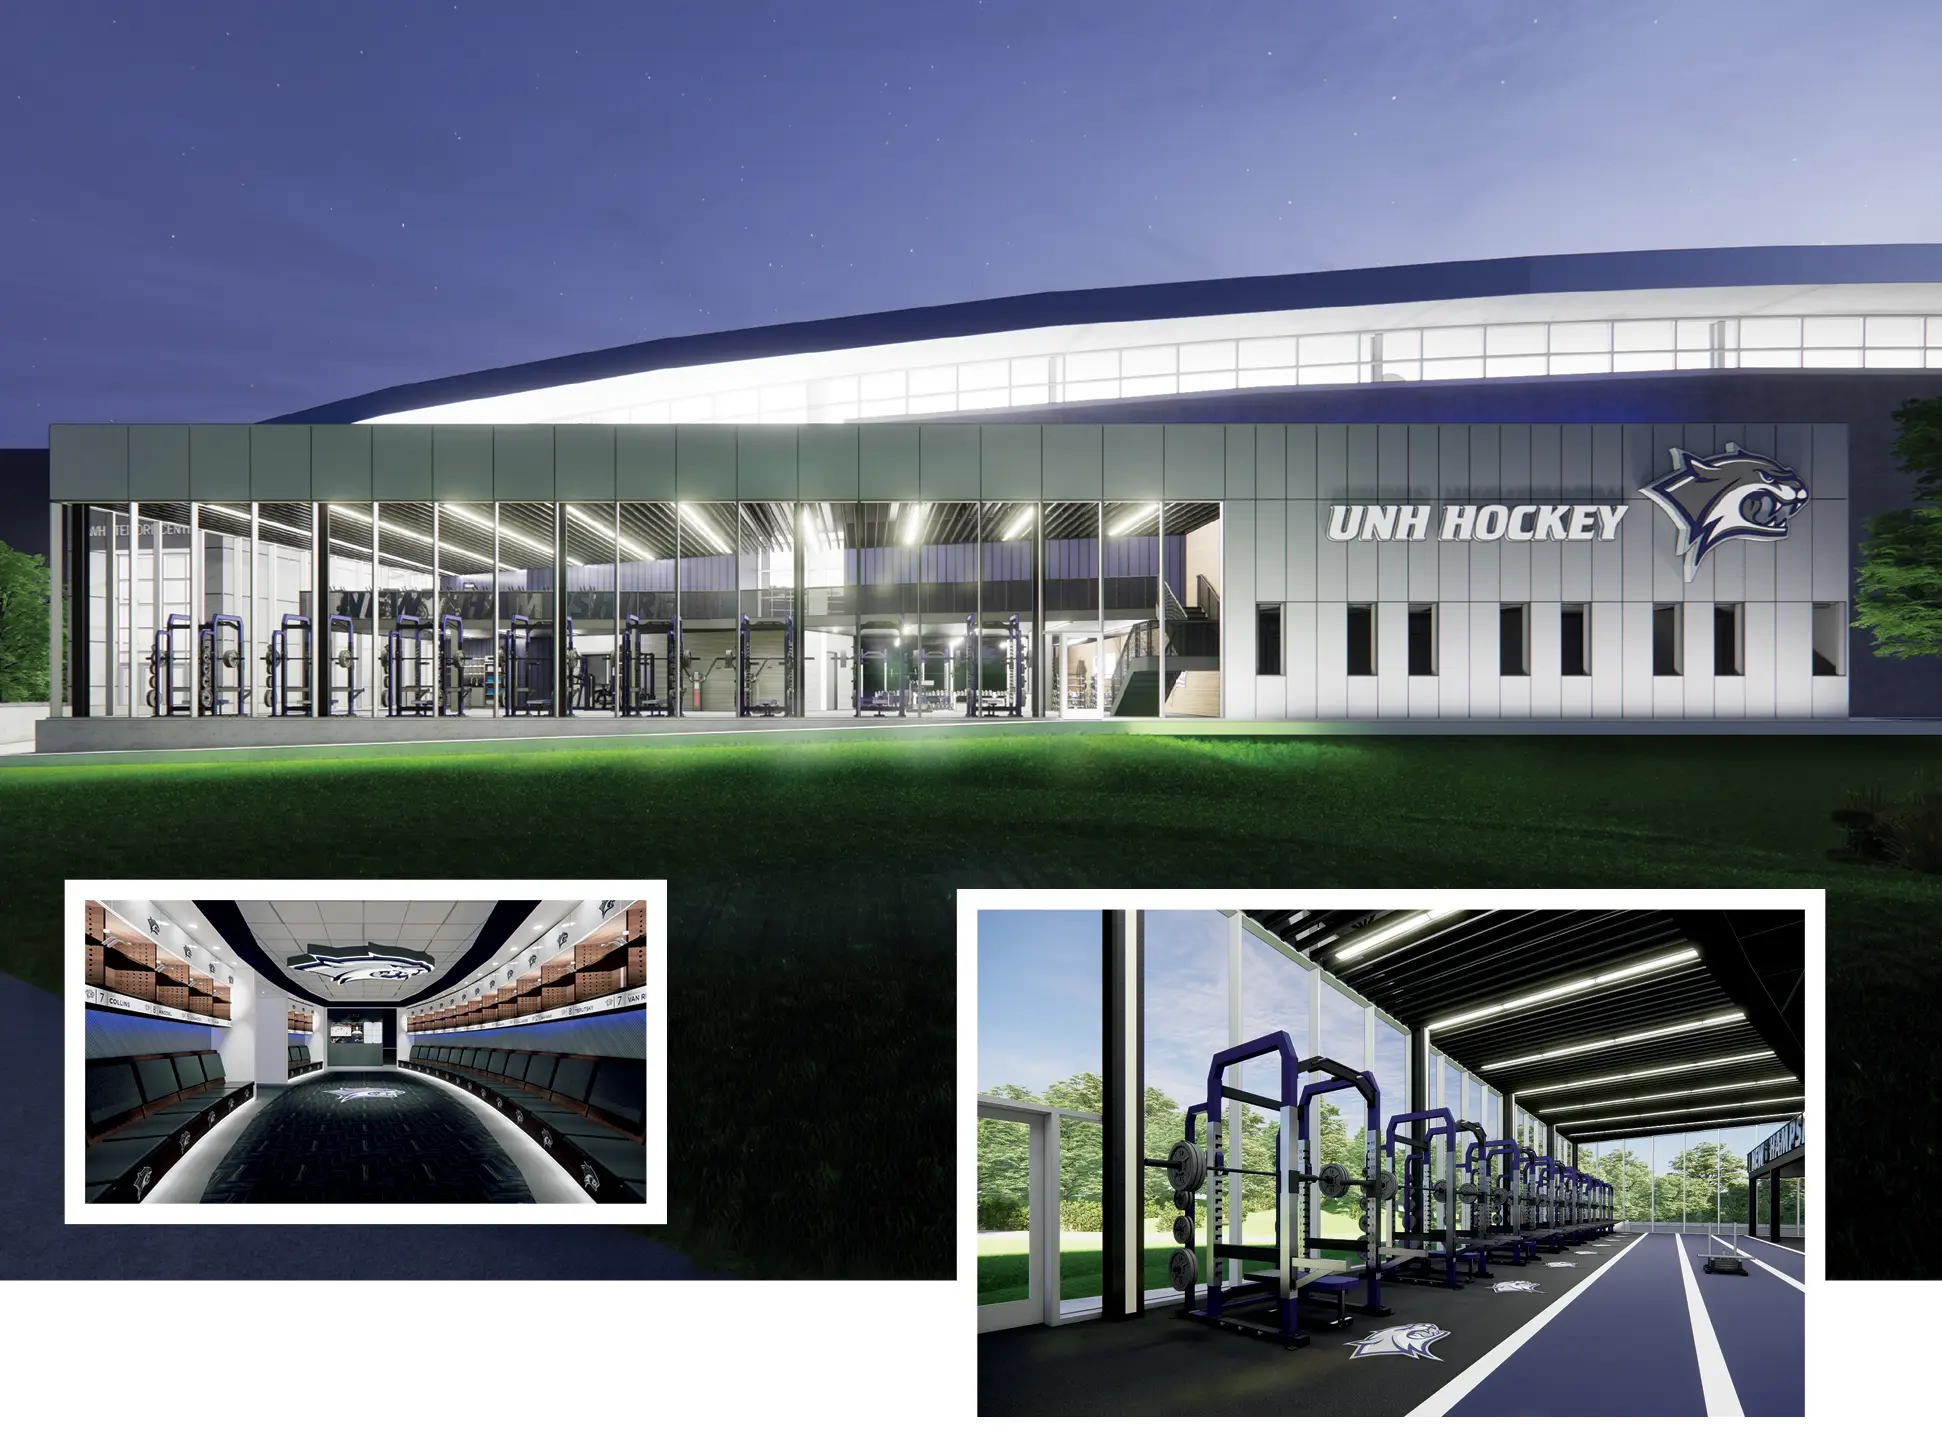 Digital renderings of the UNH Hockey Renovations Project